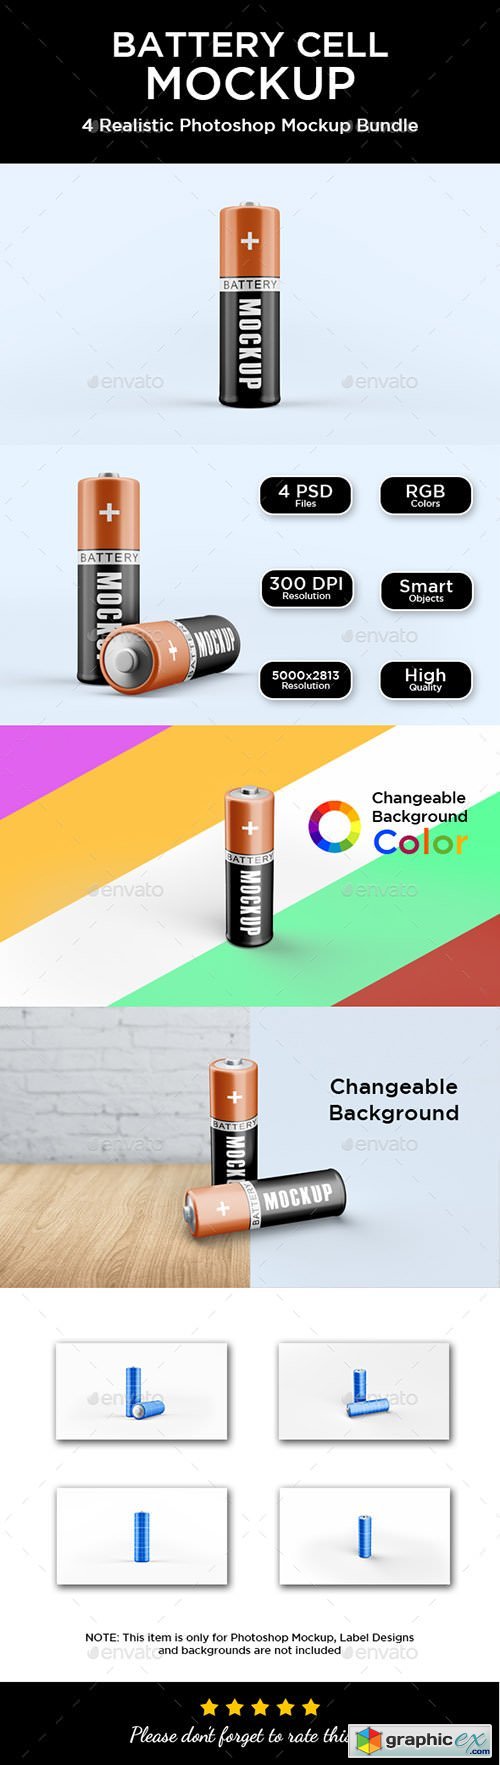 Battery Cell Mockup